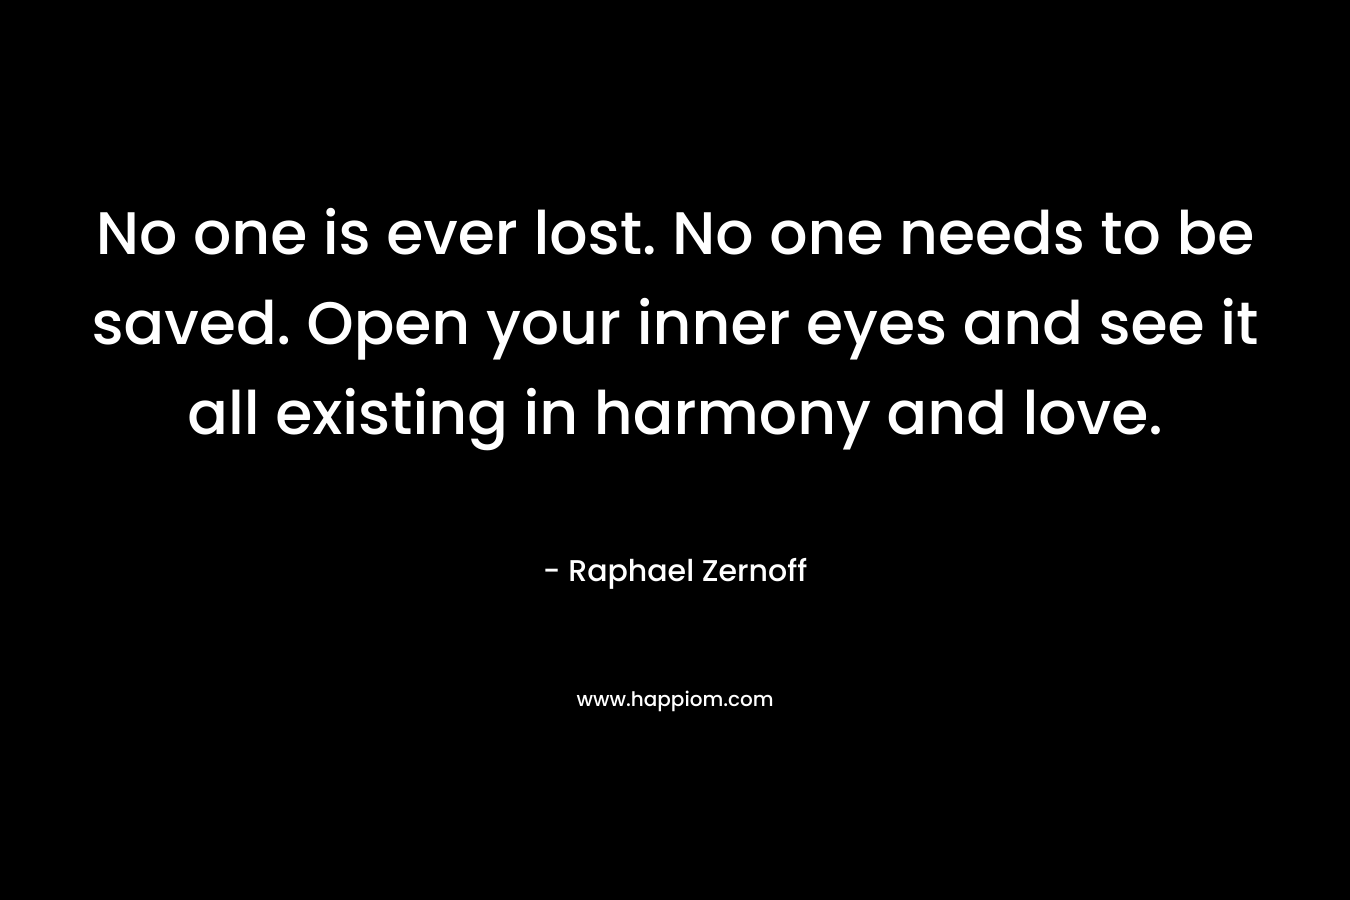 No one is ever lost. No one needs to be saved. Open your inner eyes and see it all existing in harmony and love.